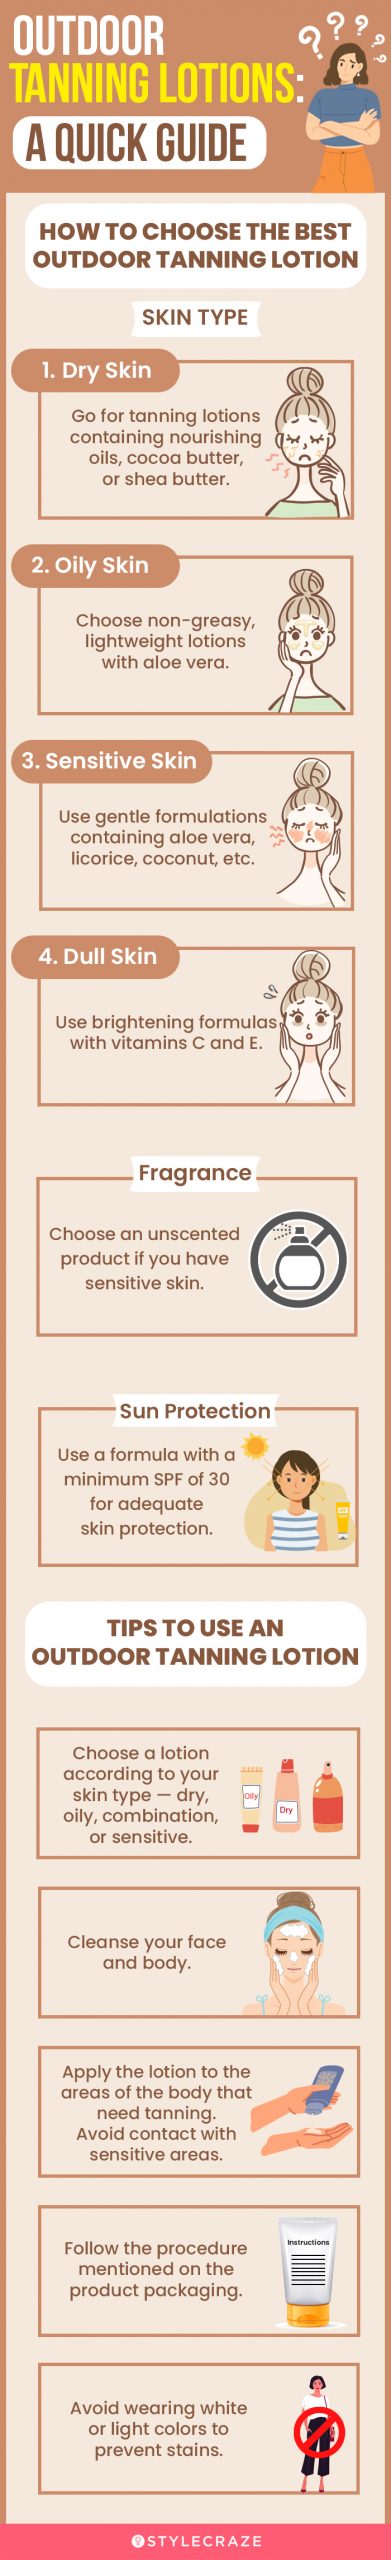 How To Choose The Best Outdoor Tanning Lotion [infographic]